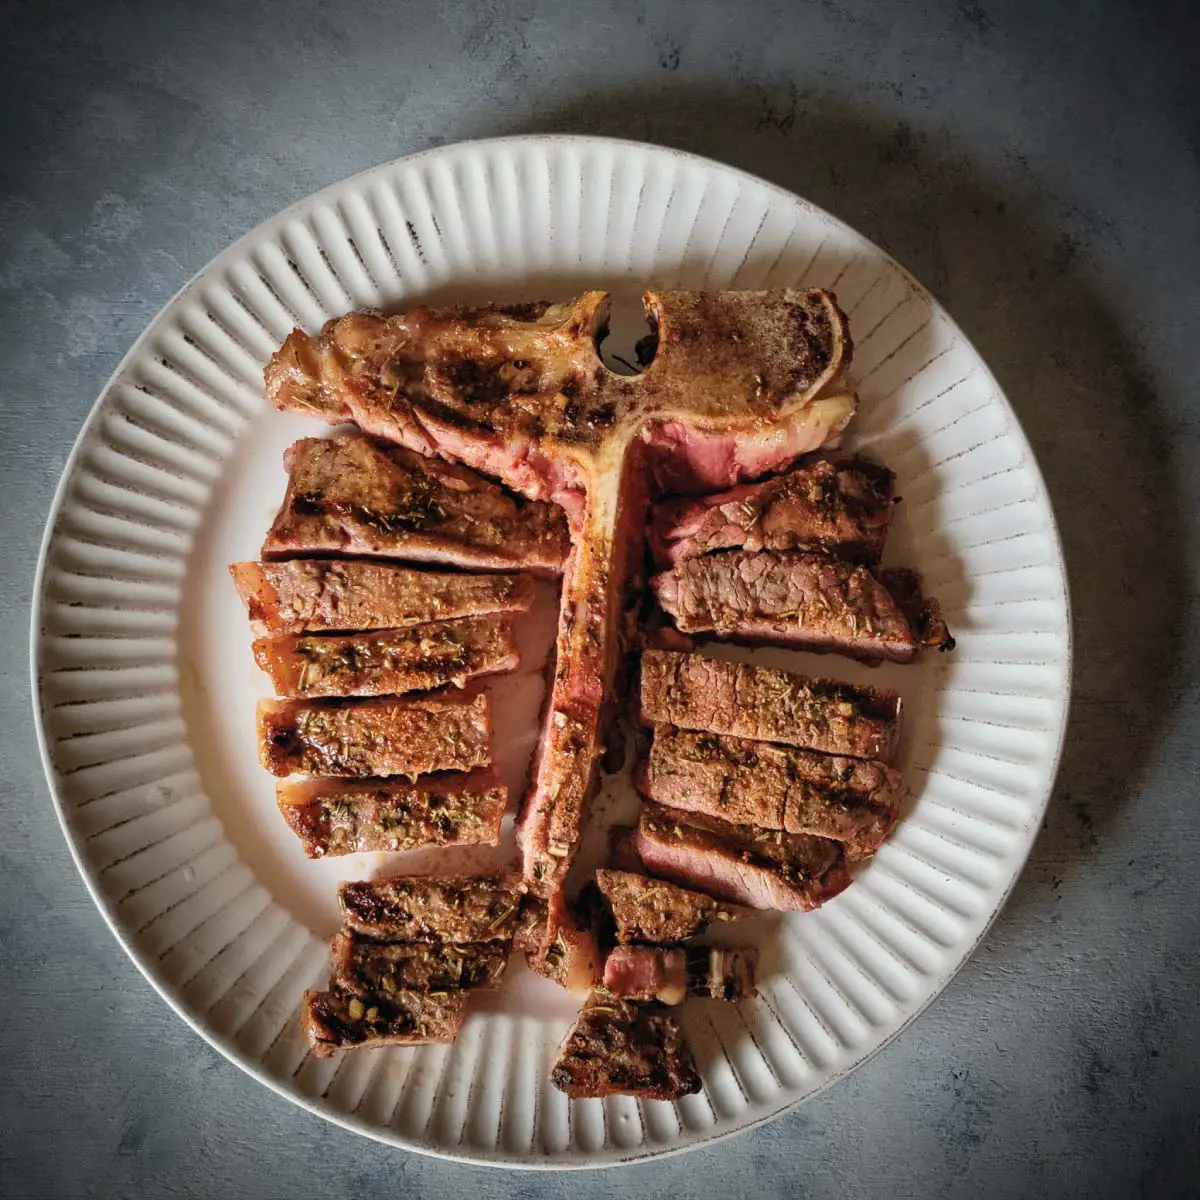 Tbone steak on a plate after being cut off the bone and into slices, ready to serve.